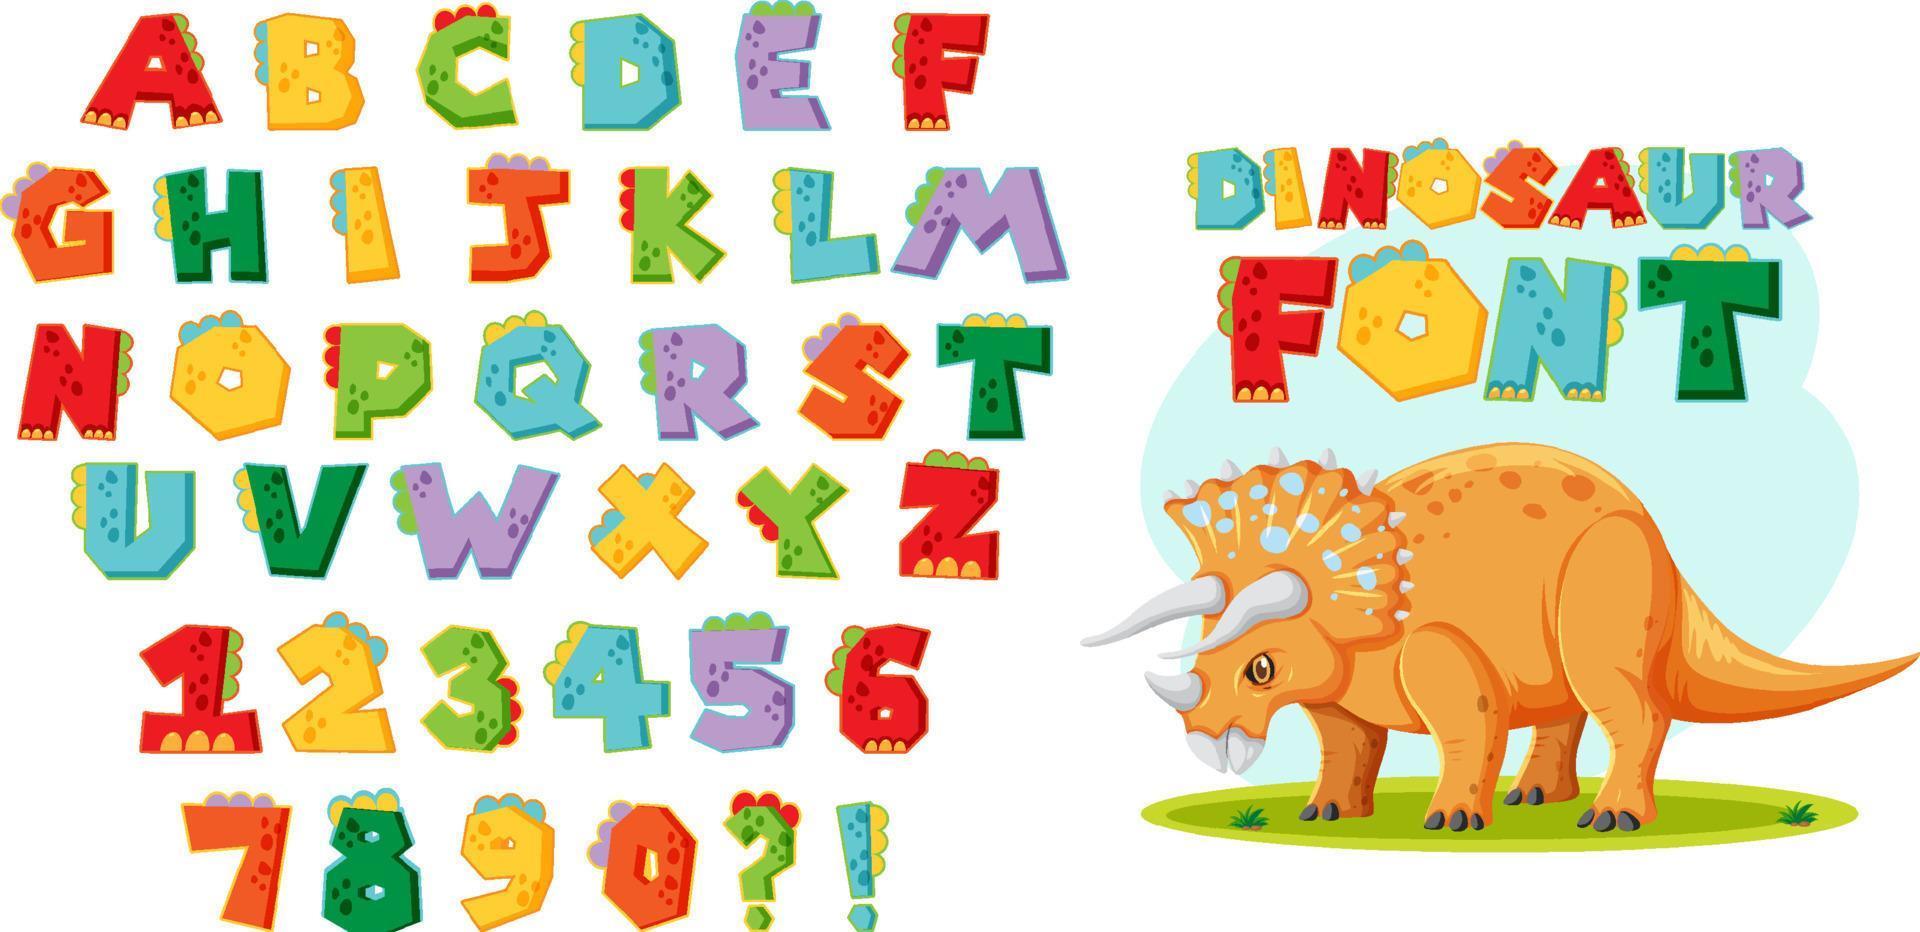 Font design for english alphabets and numbers vector